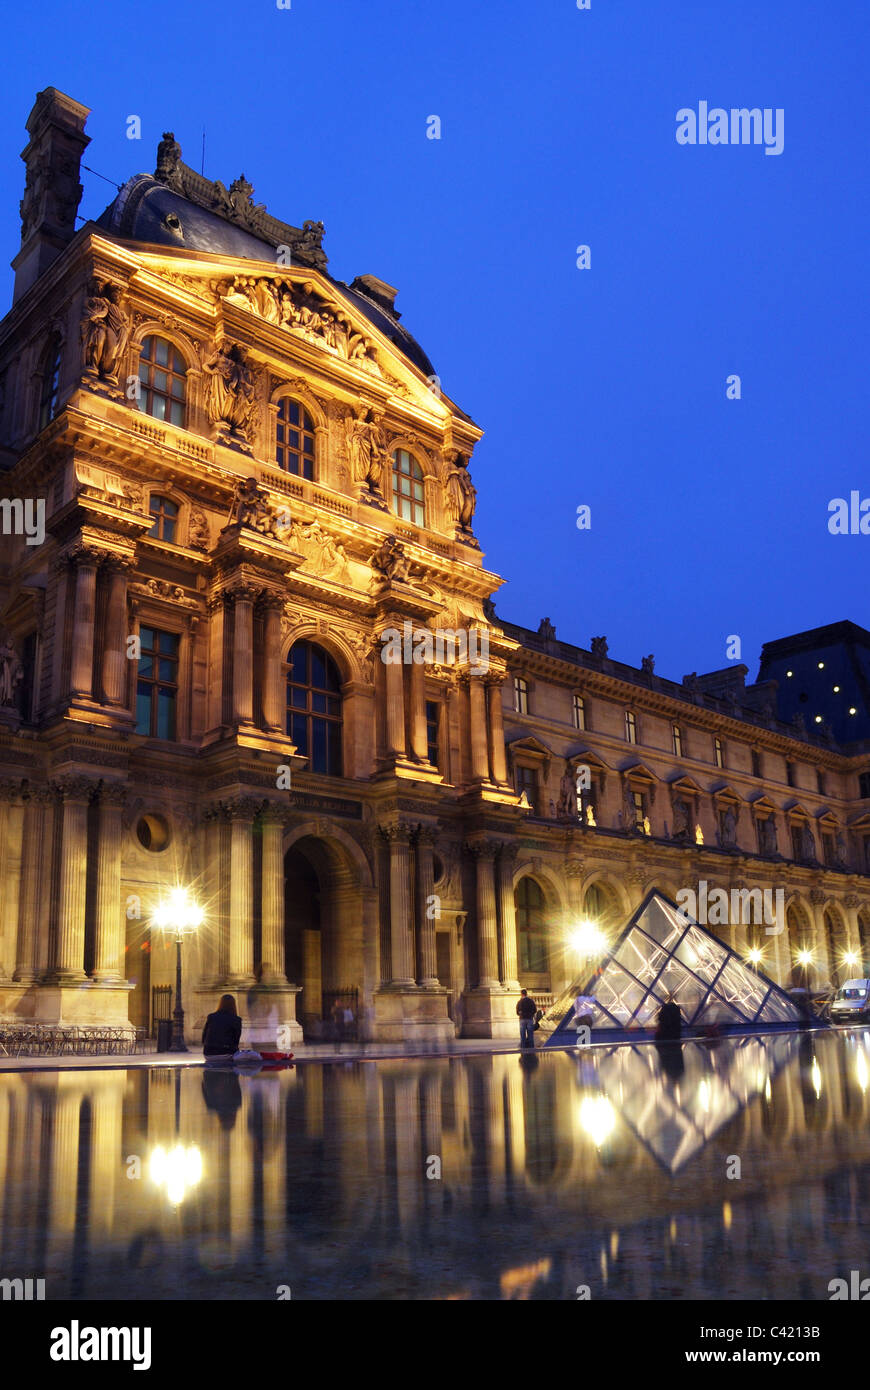 The Louvre Museum at night Stock Photo